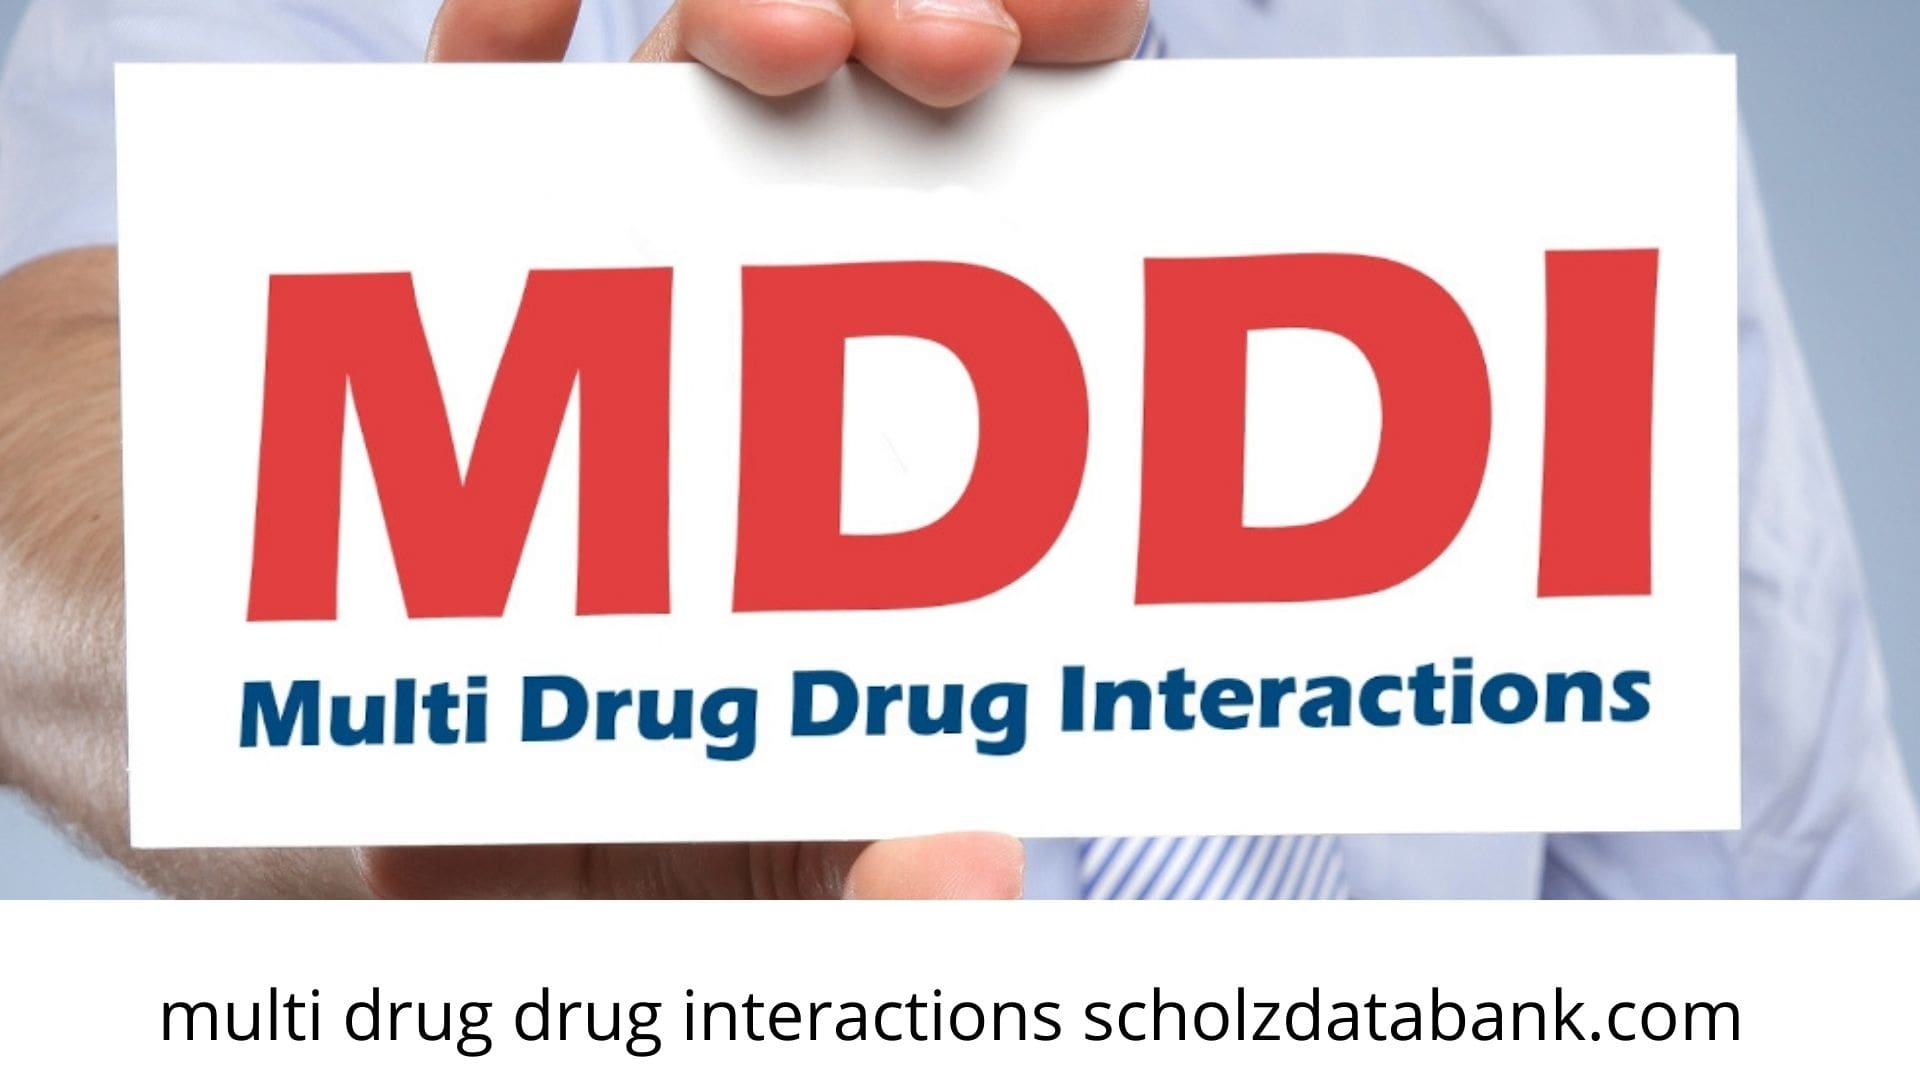 MDDI-Calculator of SCHOLZ Databank proves good performance compared to the scientific standard